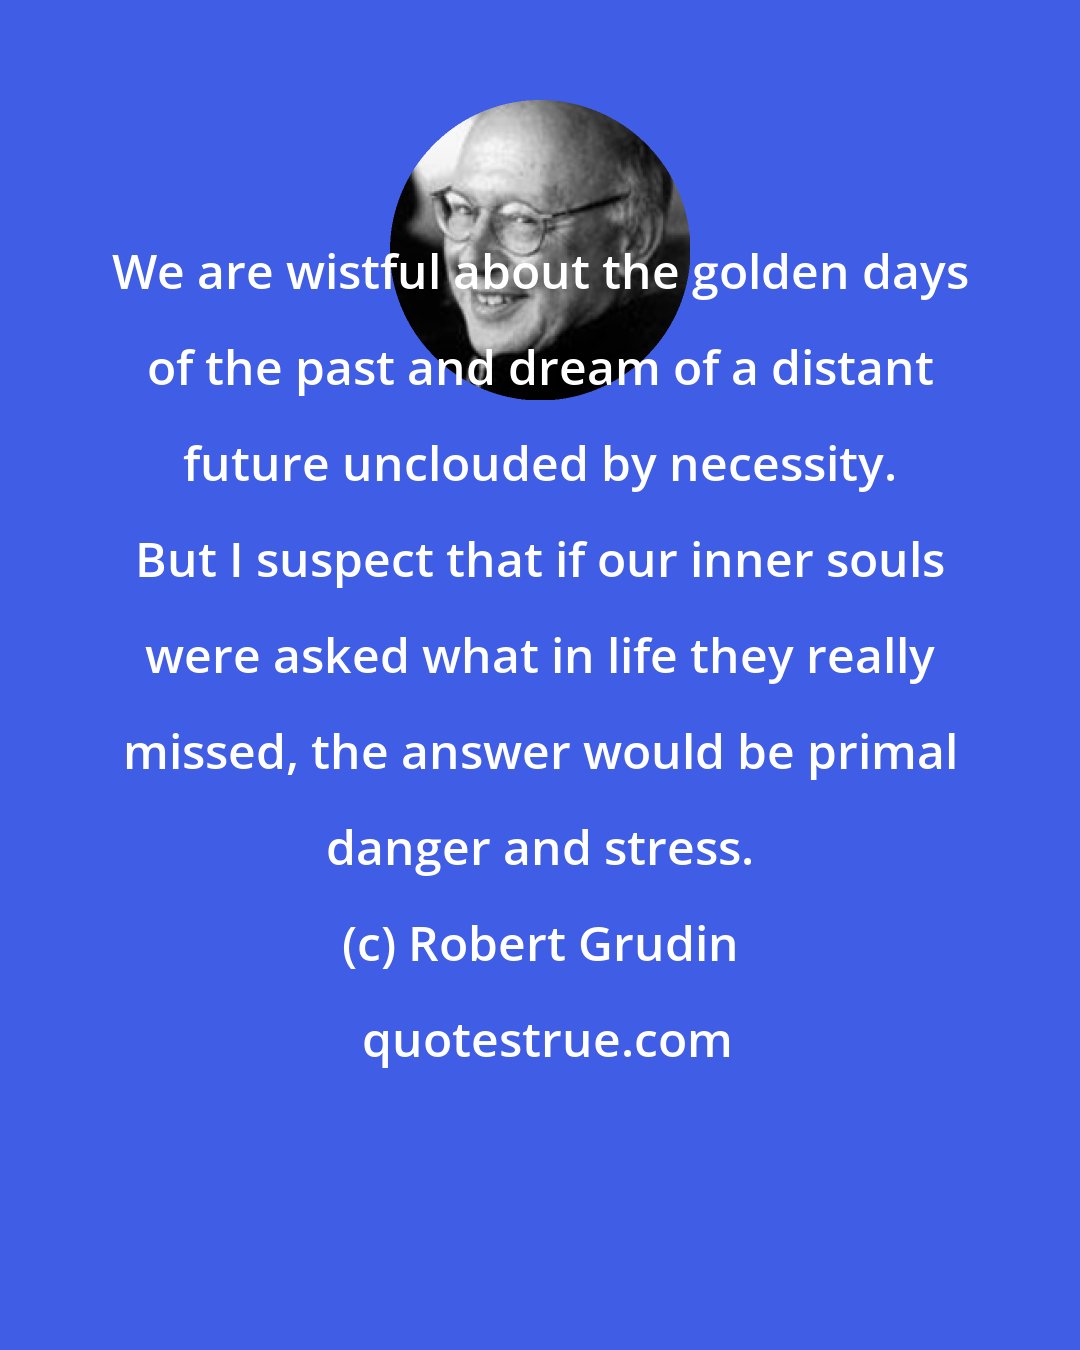 Robert Grudin: We are wistful about the golden days of the past and dream of a distant future unclouded by necessity. But I suspect that if our inner souls were asked what in life they really missed, the answer would be primal danger and stress.